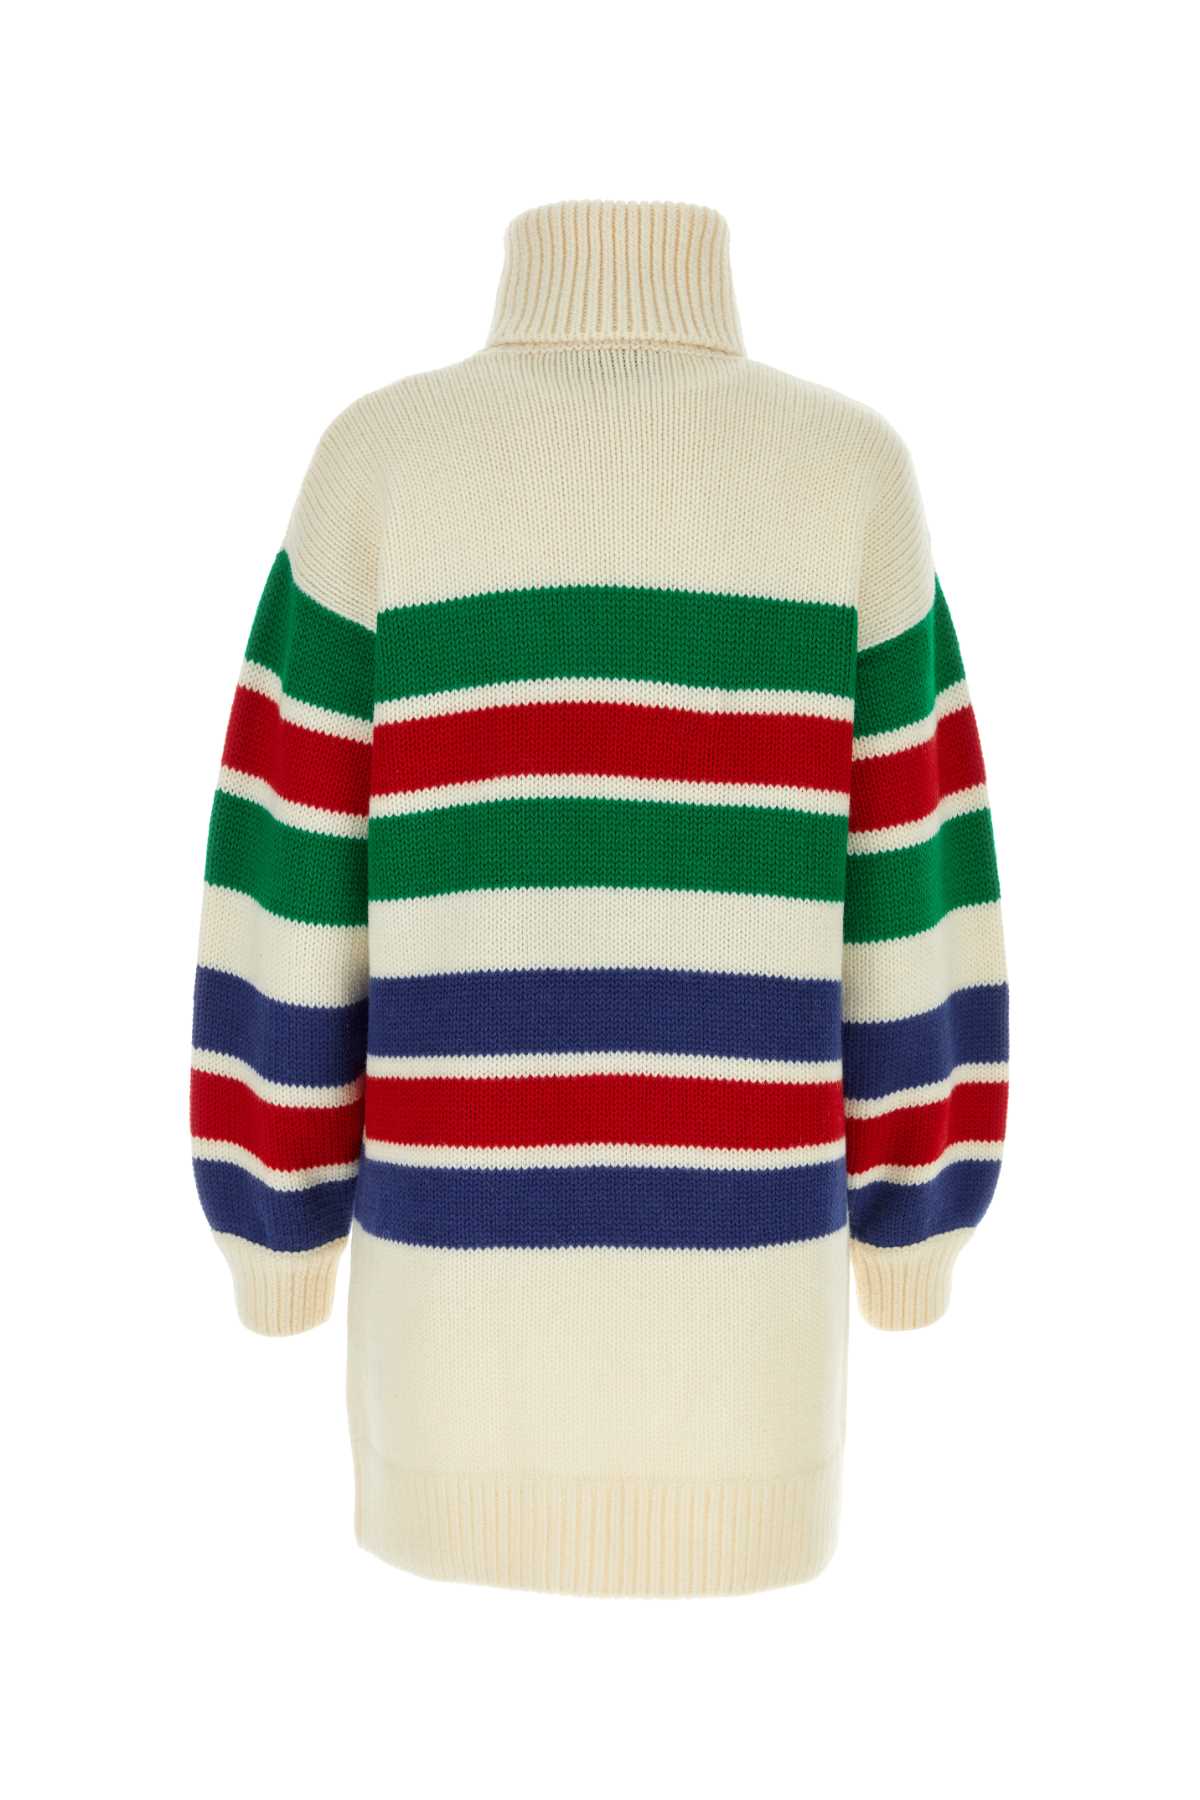 GUCCI EMBROIDERED WOOL SWEATER DRESS